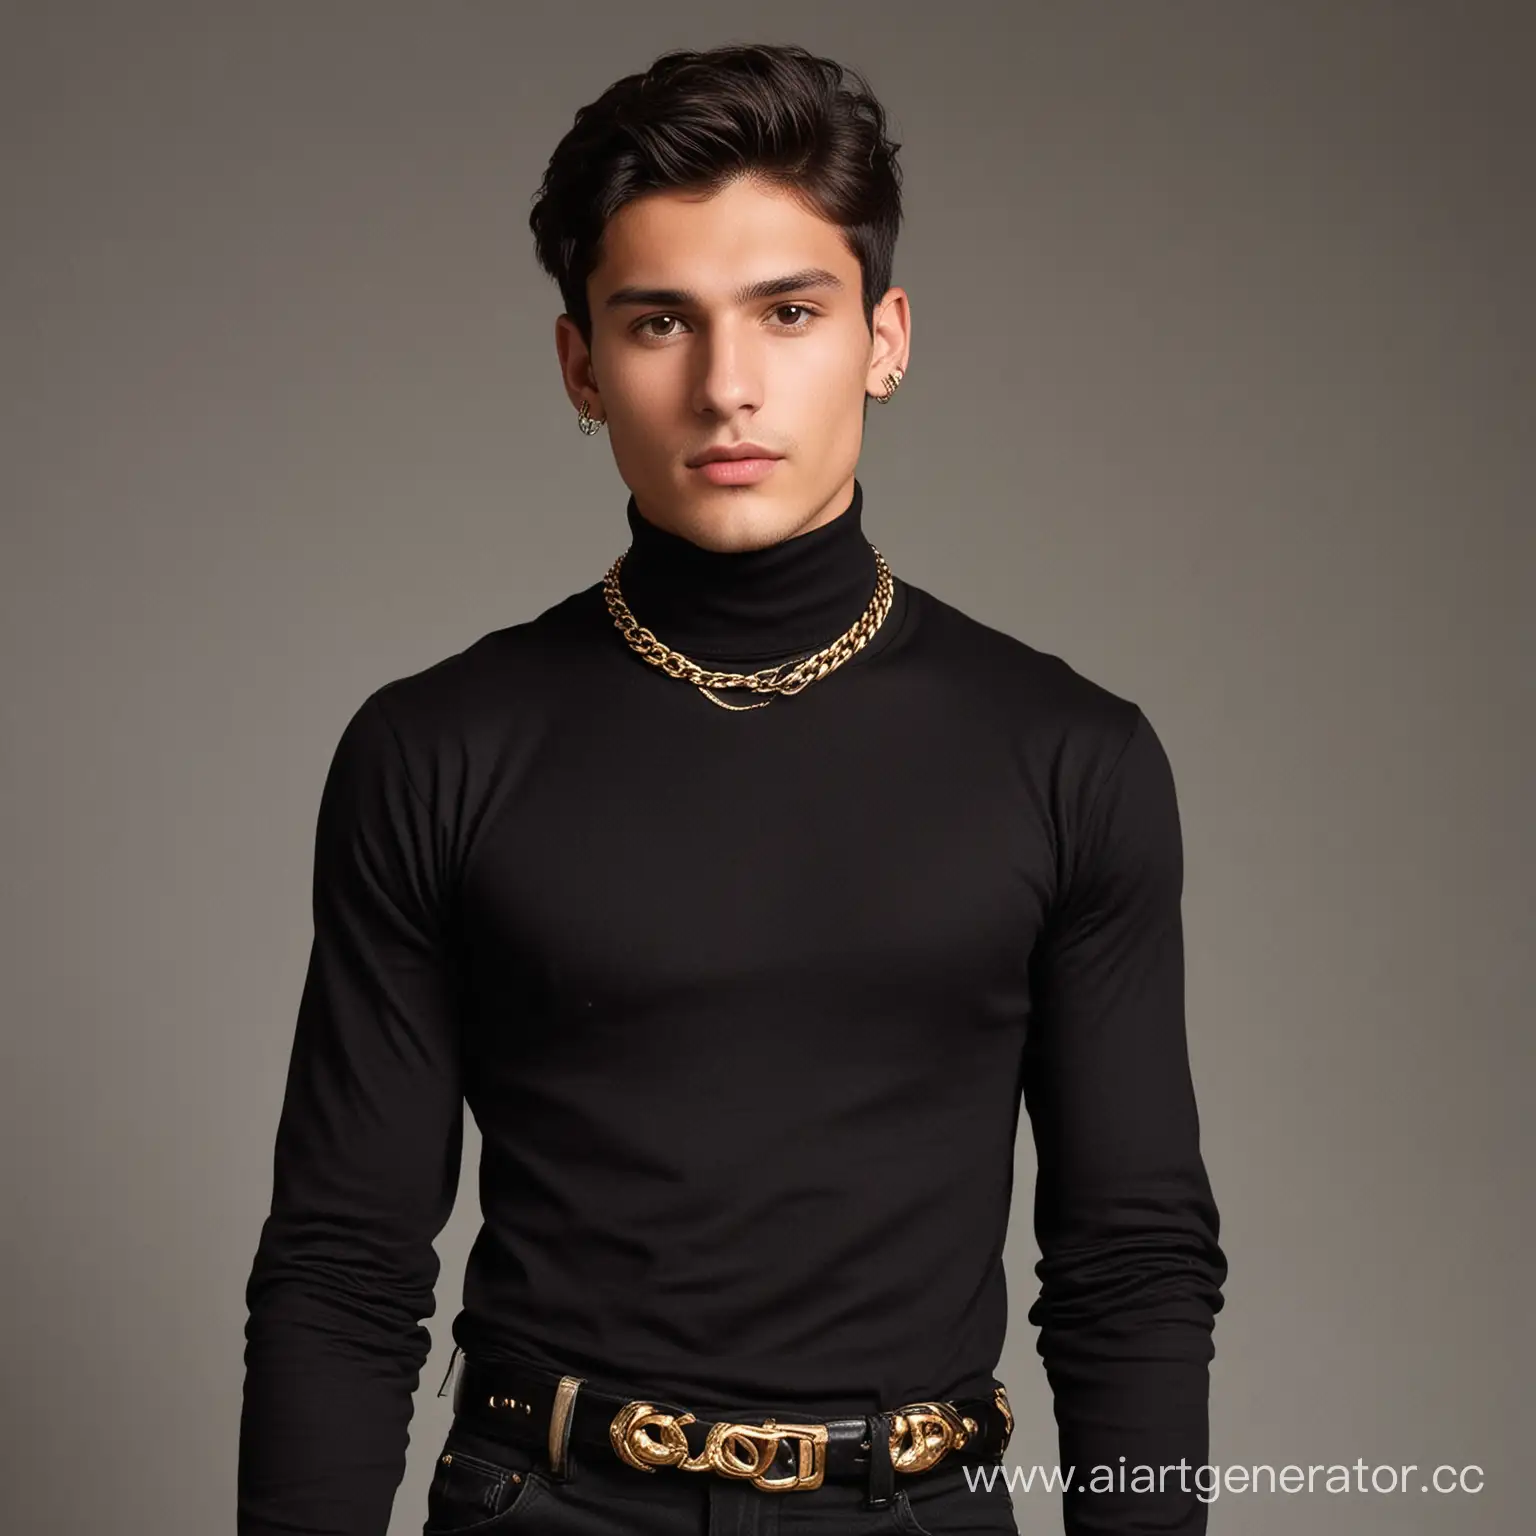 Stylish-Young-Man-with-Dark-Hair-and-Gold-Chain-Necklace